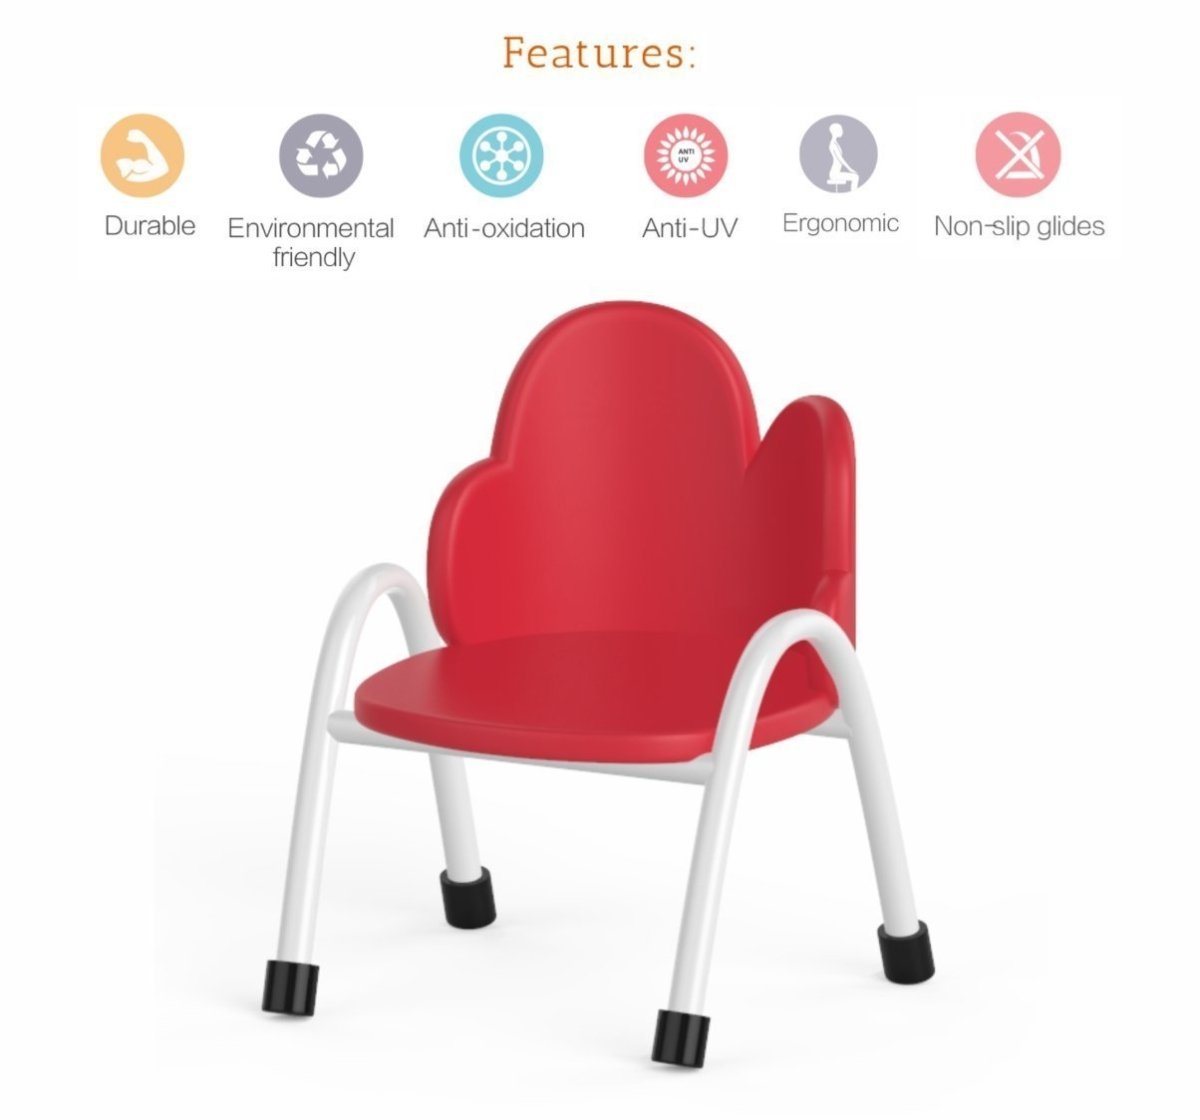 OK Play Cloud Chair - Red - FTFF000436